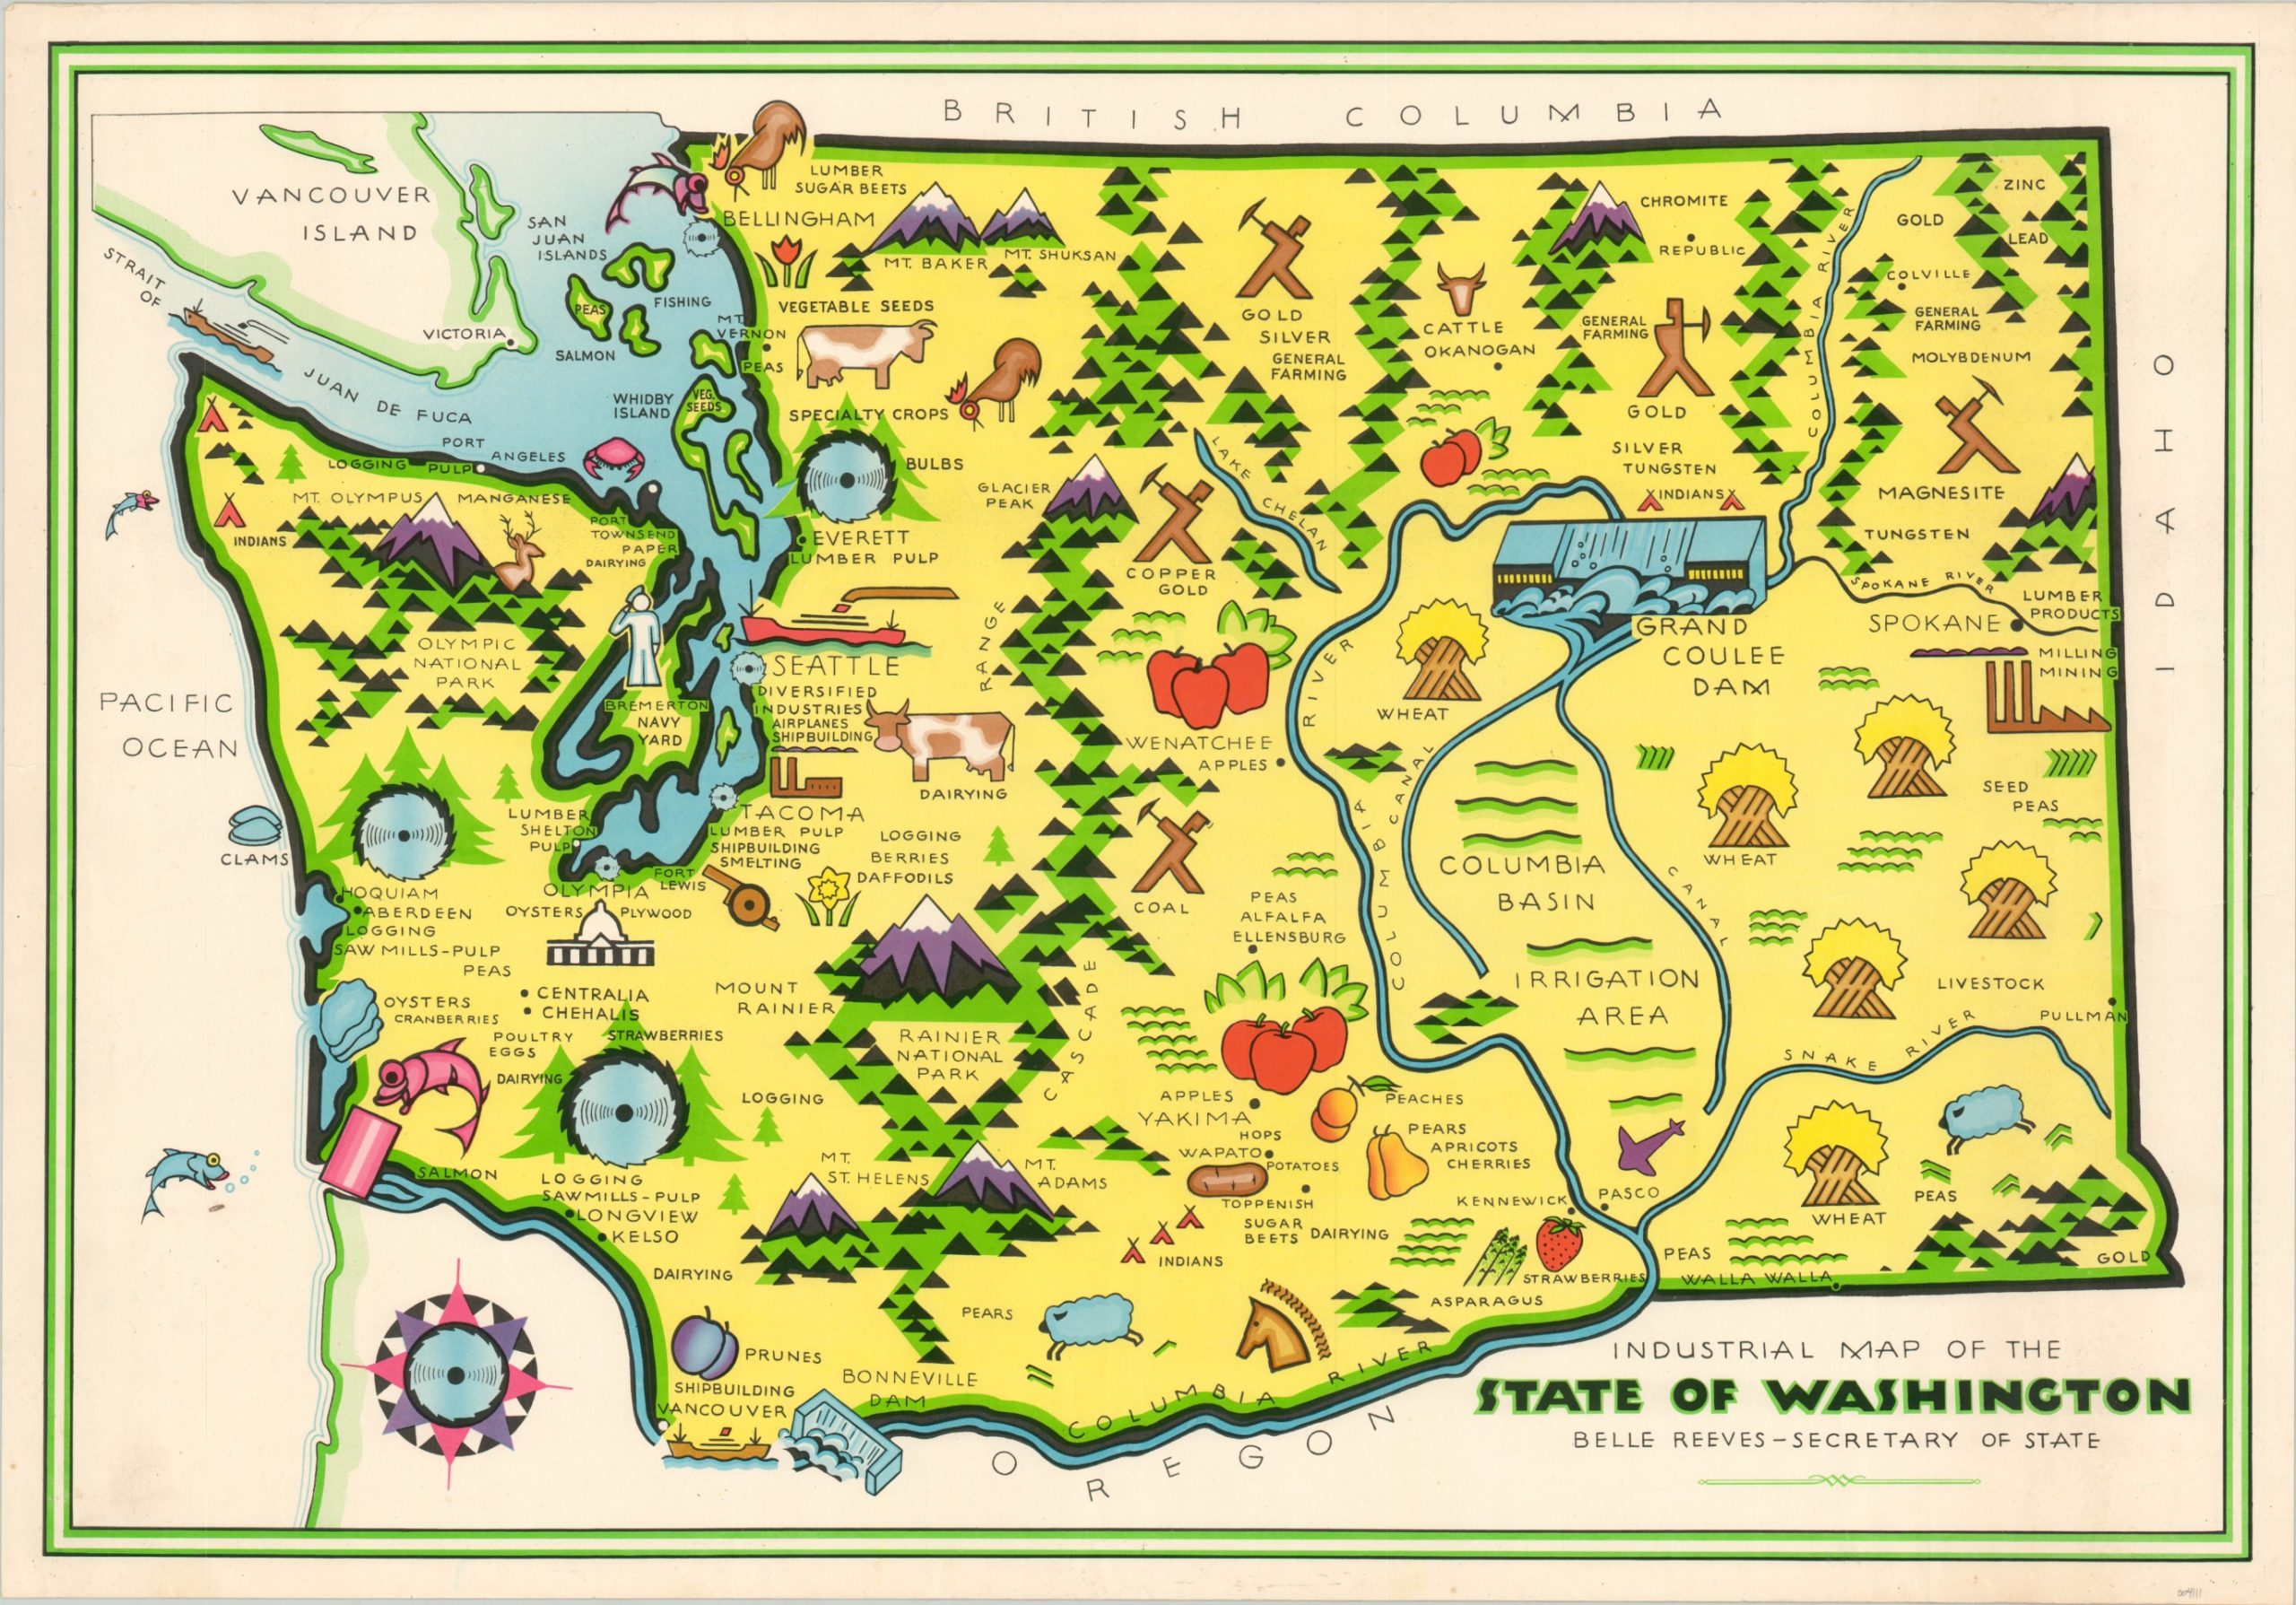 Industrial Map of the State of Washington